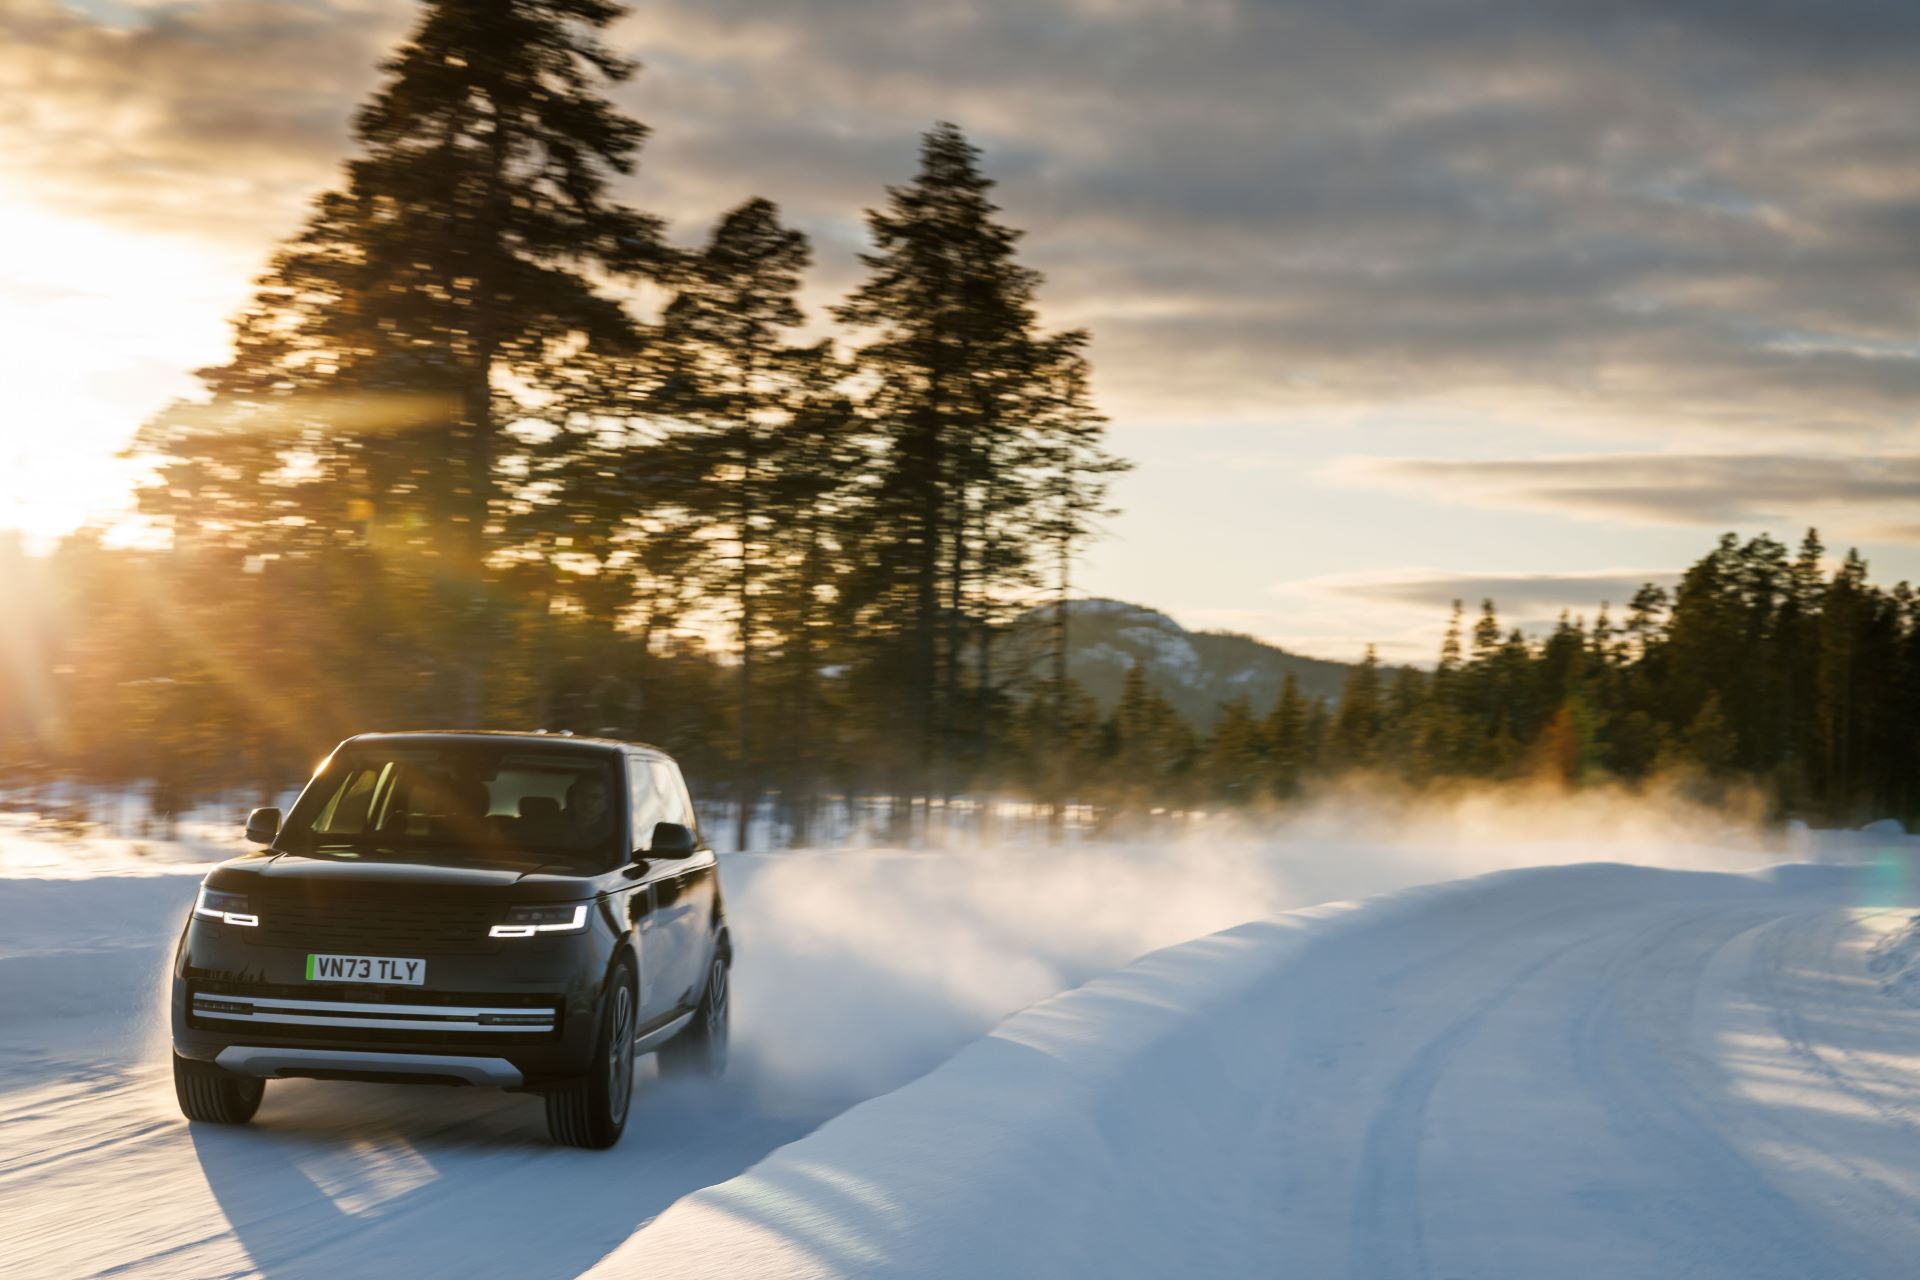 Global Testing Commences for First Range Rover Electric Prototype